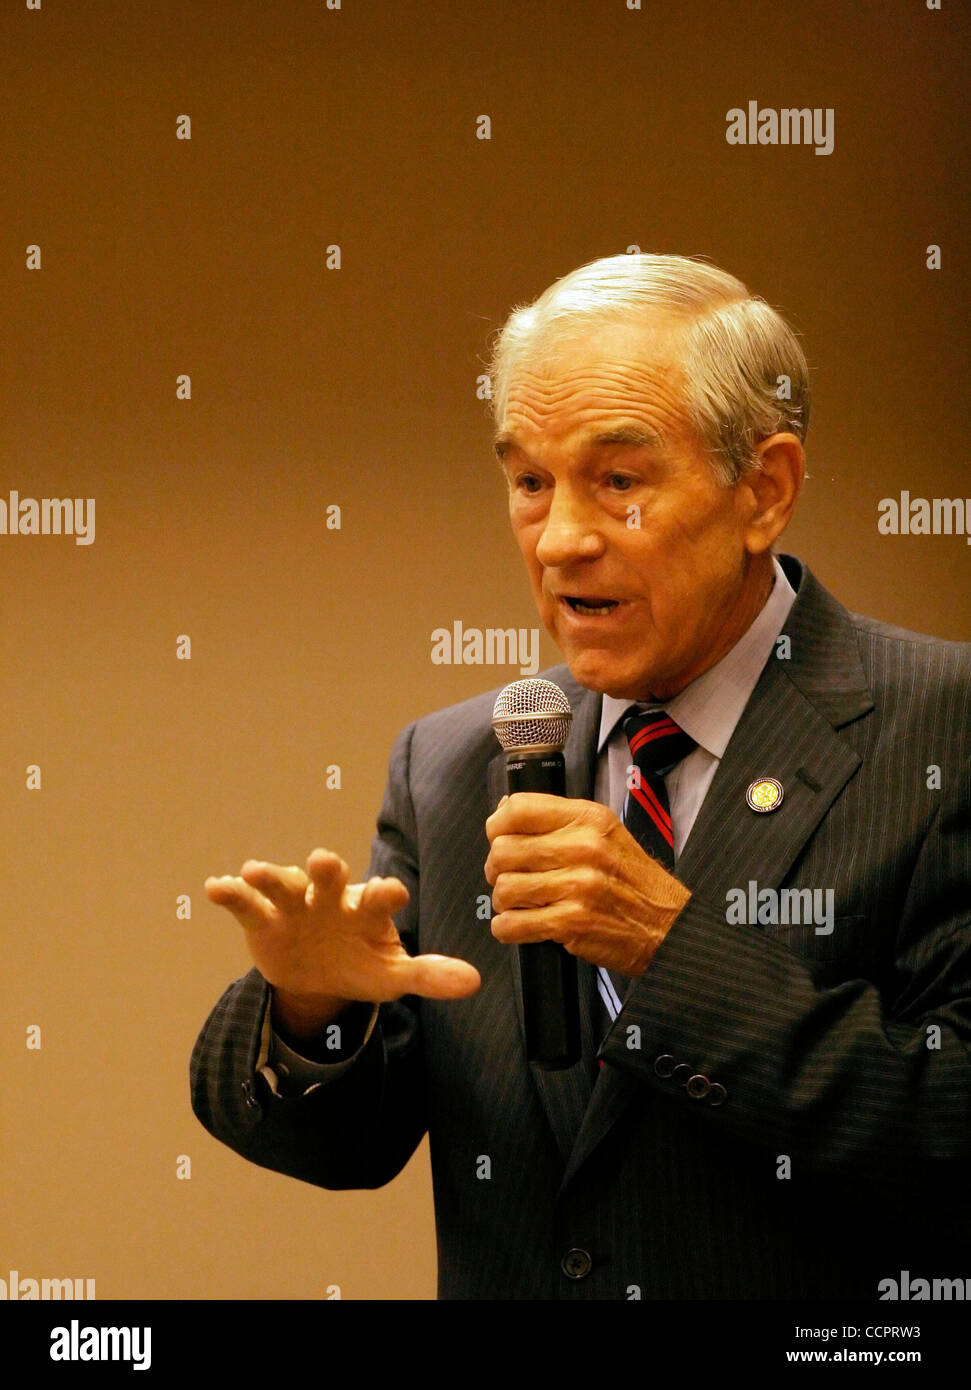 Oct 02, 2010 - Erlanger, Kentucky, U.S. - Texas Congressman RON PAUL speaks at a Tea Party rally for his Republican son's Kentucky Senate campaign at the Holiday Inn Cincinnati-Airport hotel. Paul is generally considered to be the patriarch of the Tea Party movement. (Credit Image: © Billy Suratt/Ap Stock Photo